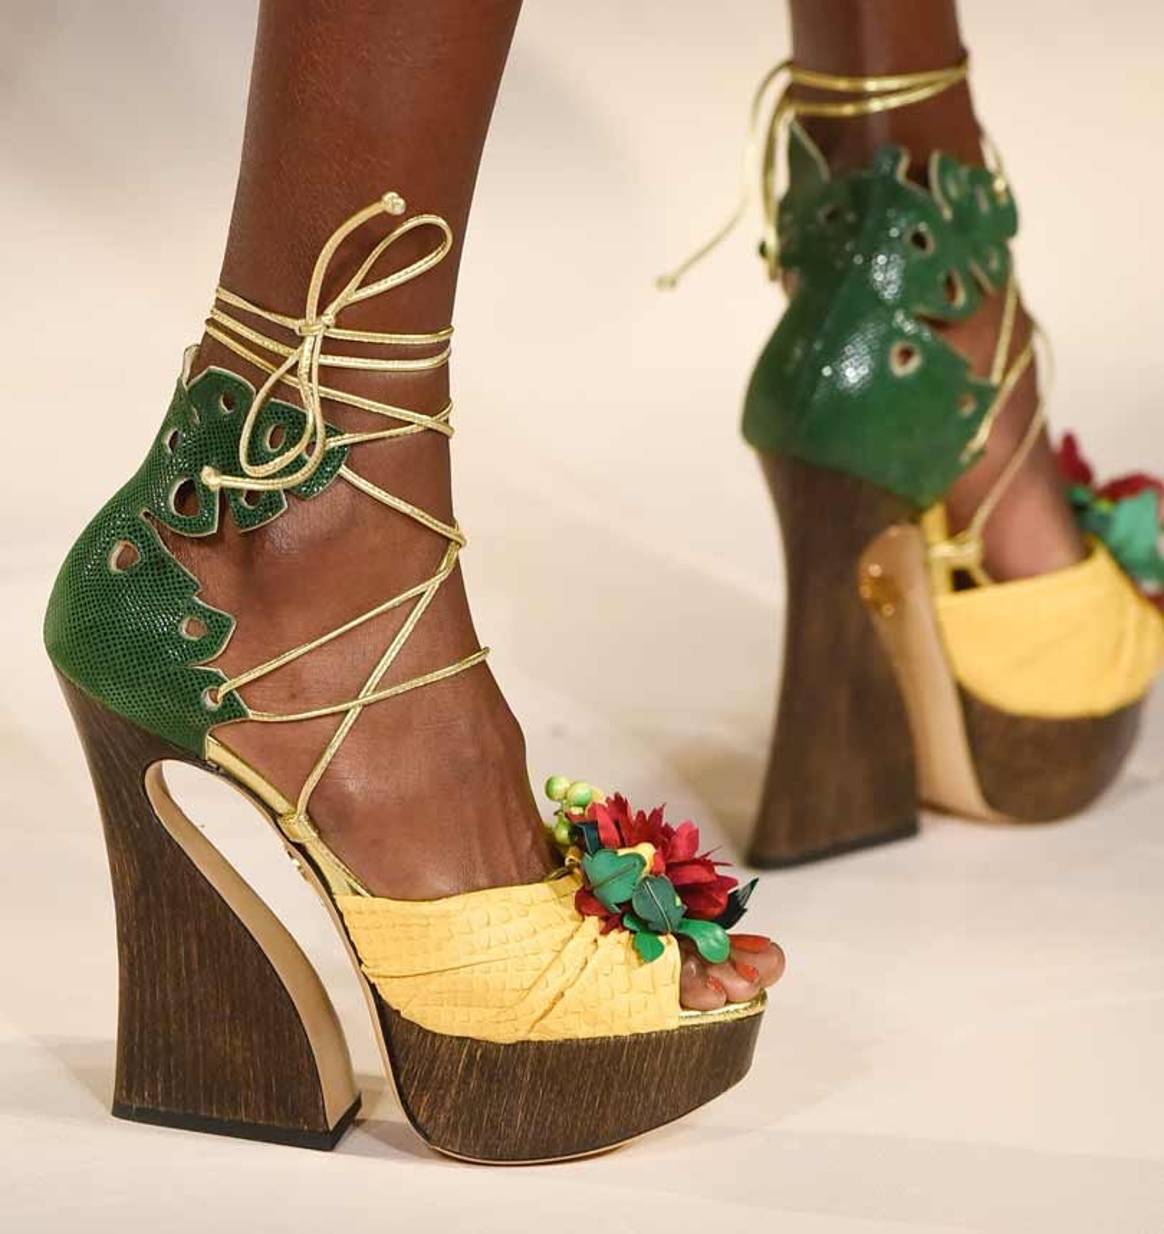 Charlotte Olympia files for Chapter 11 bankruptcy protection in the US